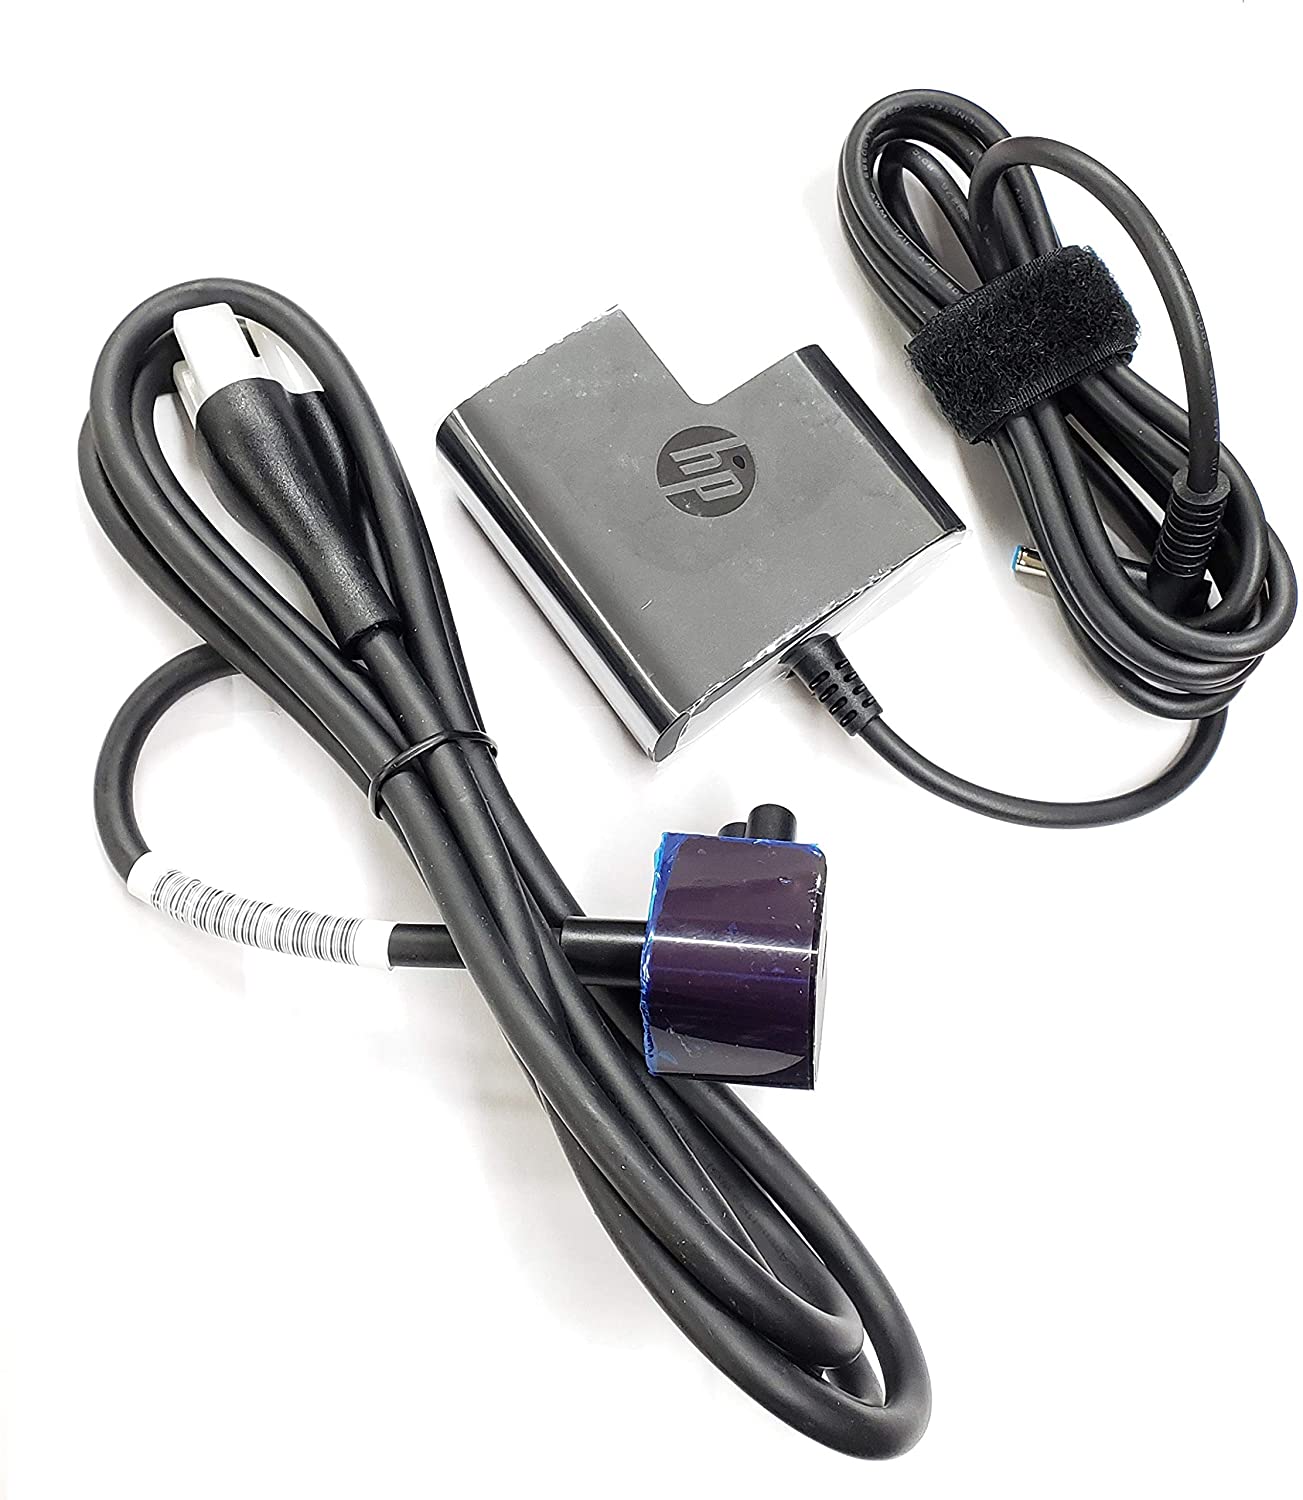 45W Original HP Envy x360 13-ag0014au Charger AC Adapter Power Supply